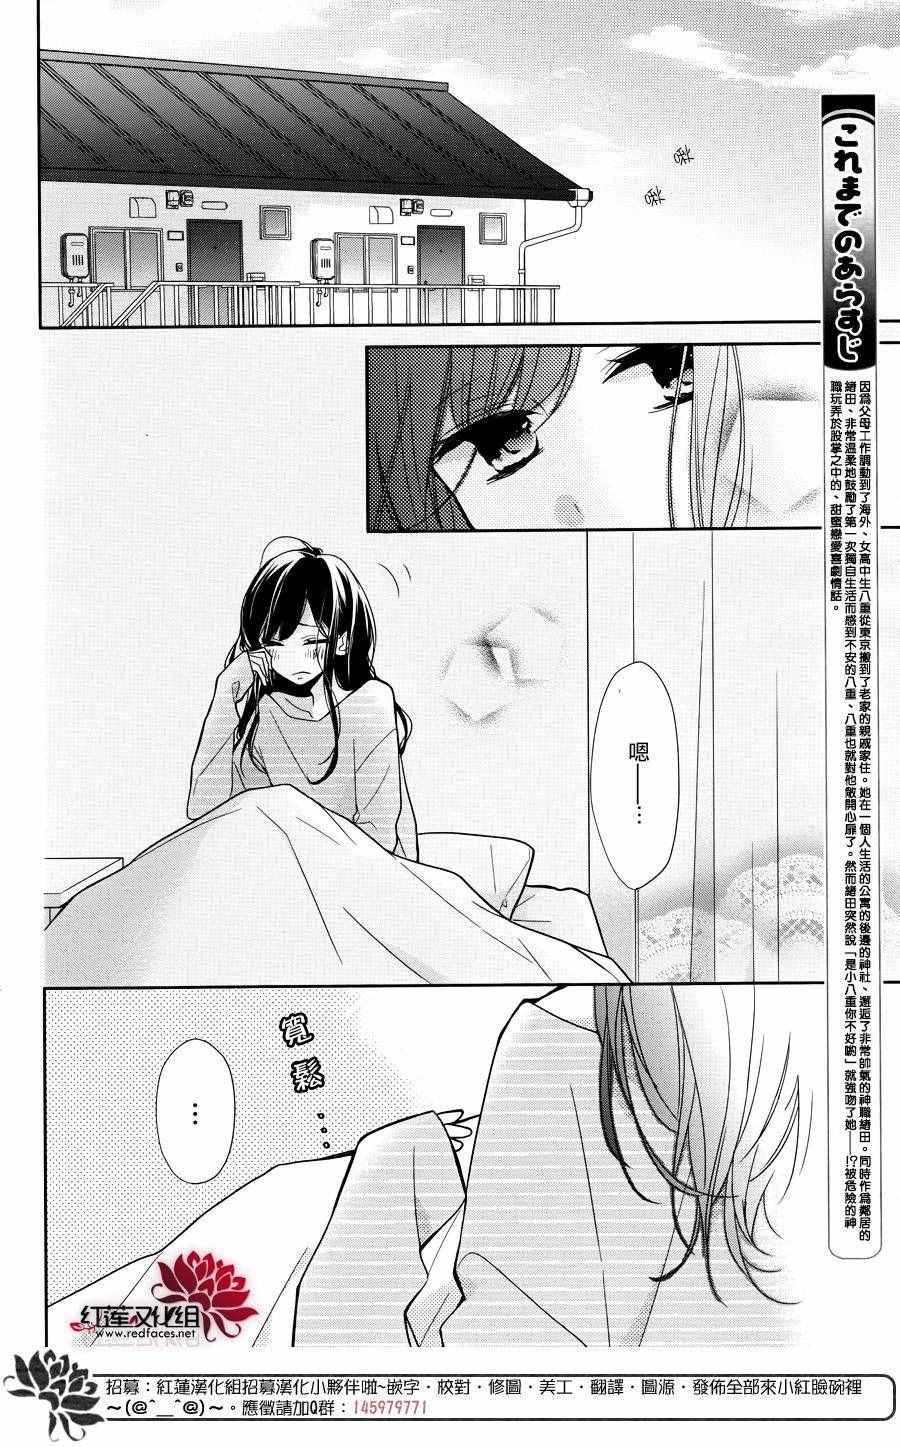 《If given a second chance》漫画 second chance 005话